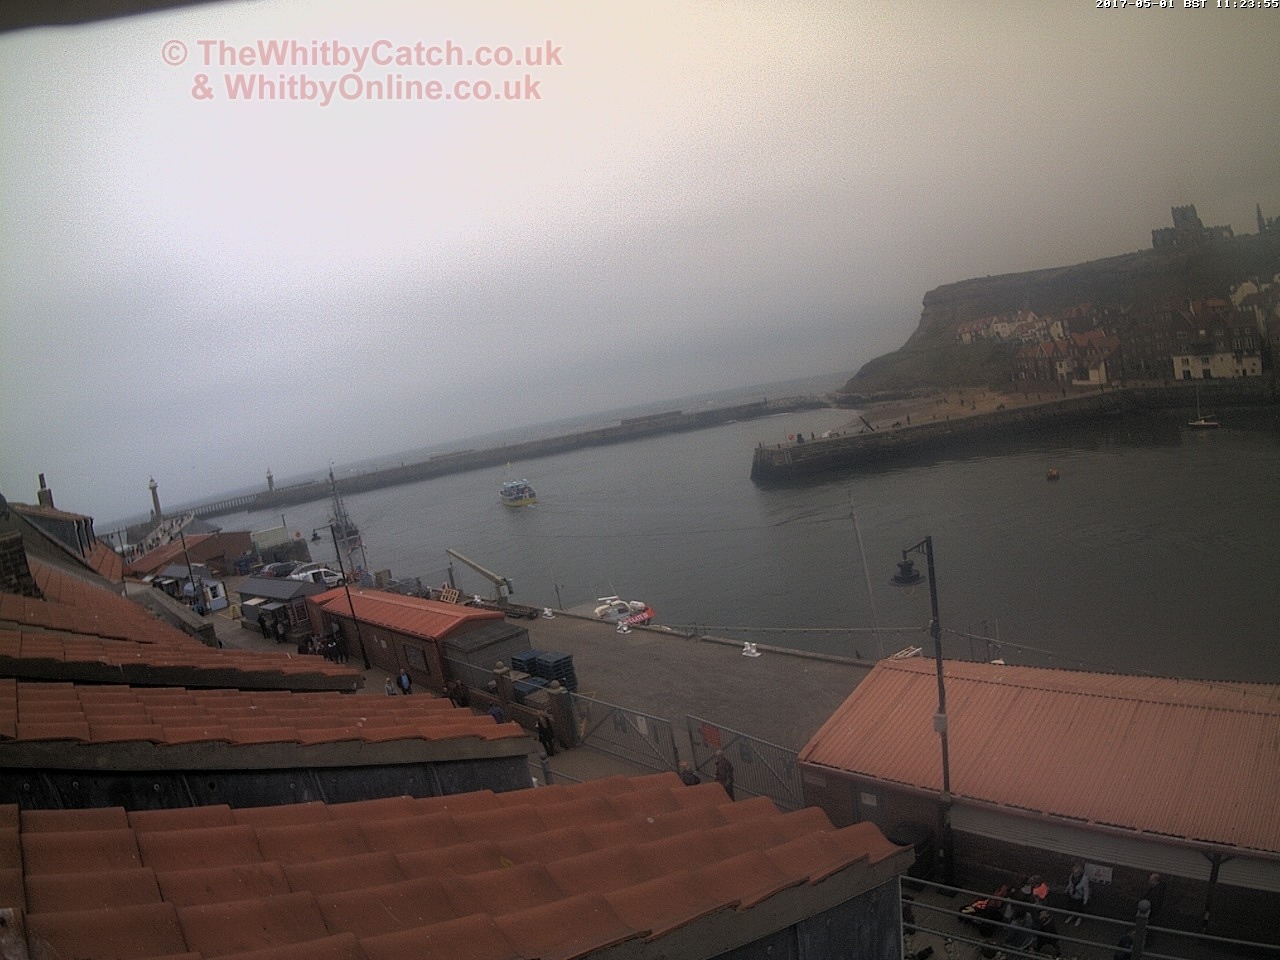 Whitby Mon 1st May 2017 11:24.